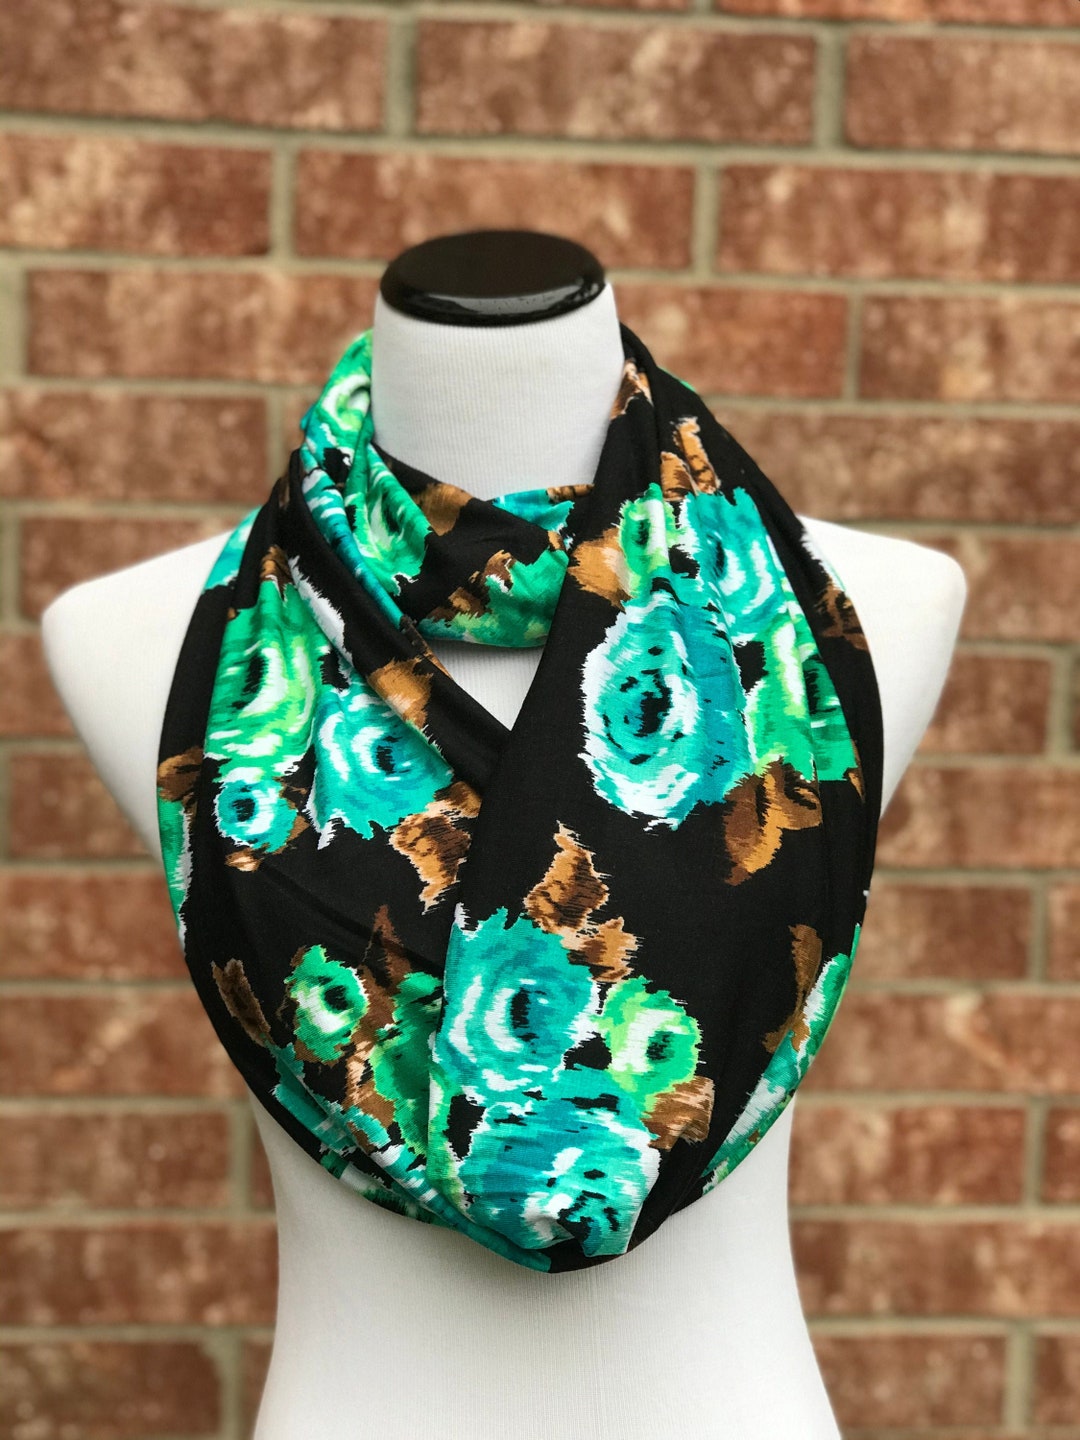 Black Teal Scarf Floral Infinity Scarf Roses Print Scarf Soft Jersey ...